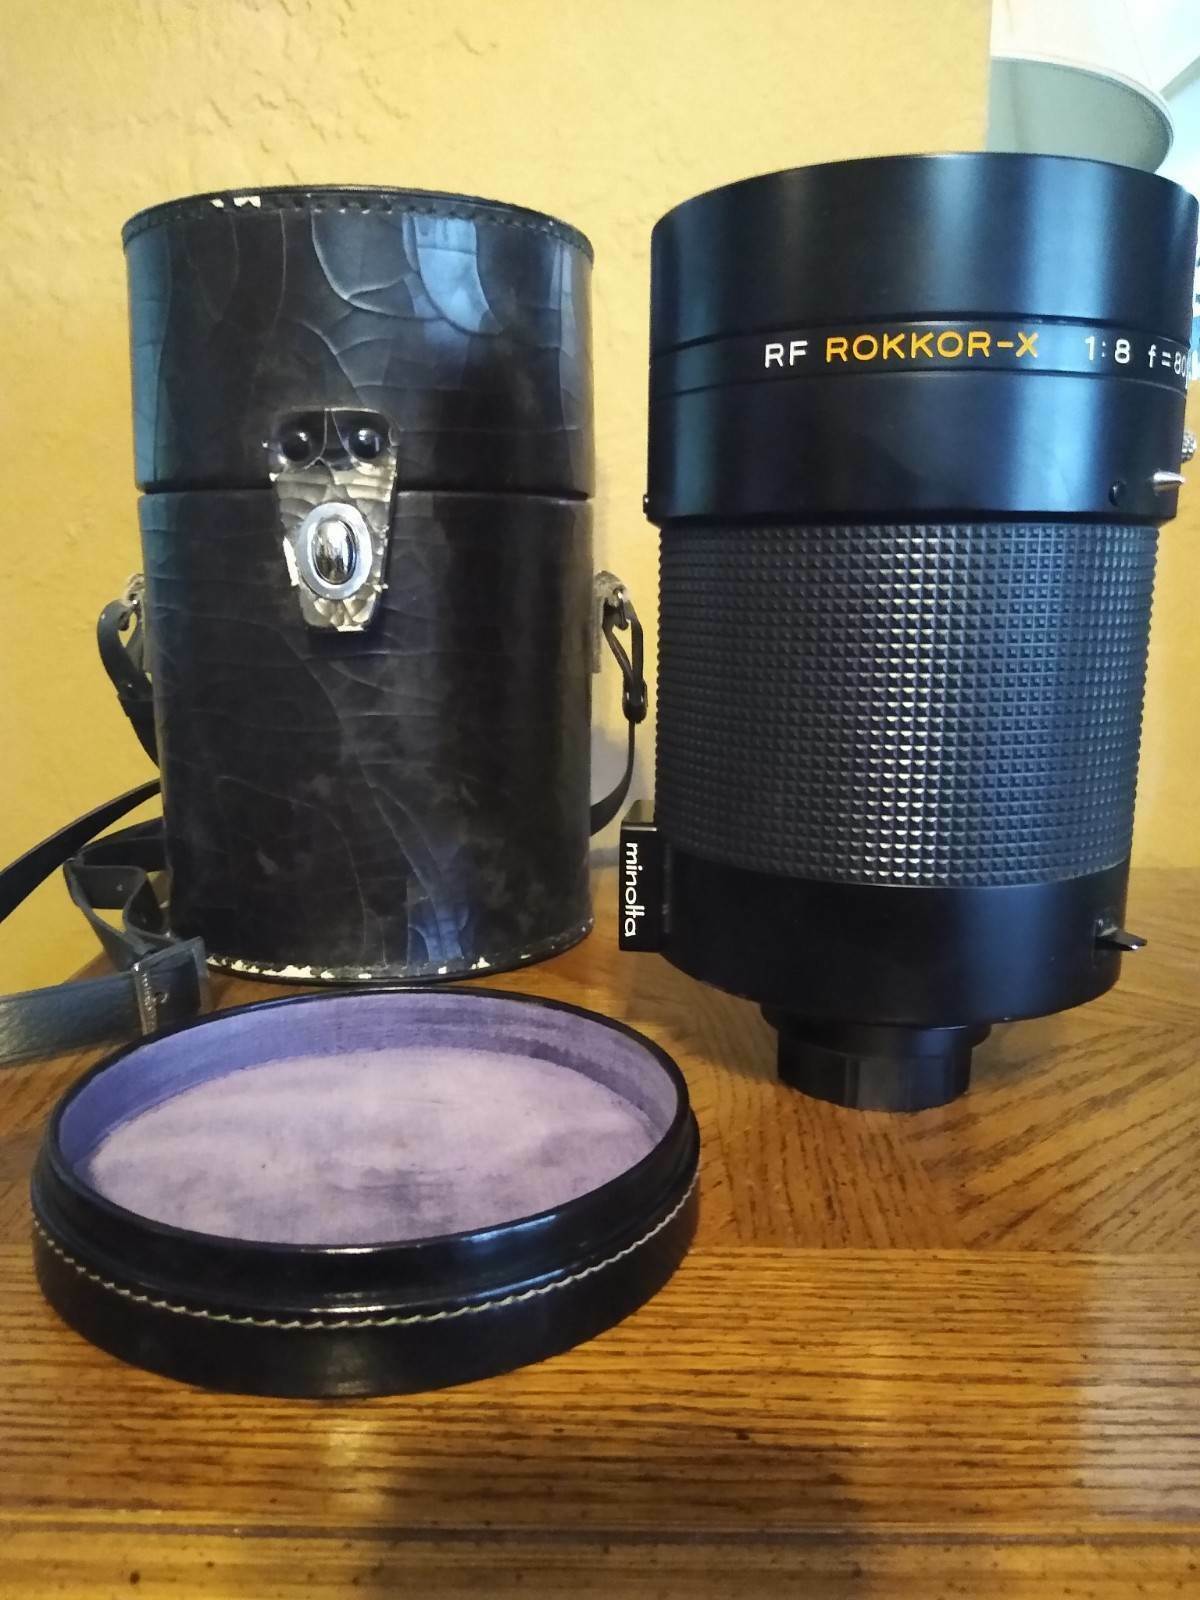 Minolta Rf Rokkor-x 1:8 F8 800mm Lens With Case And Filters